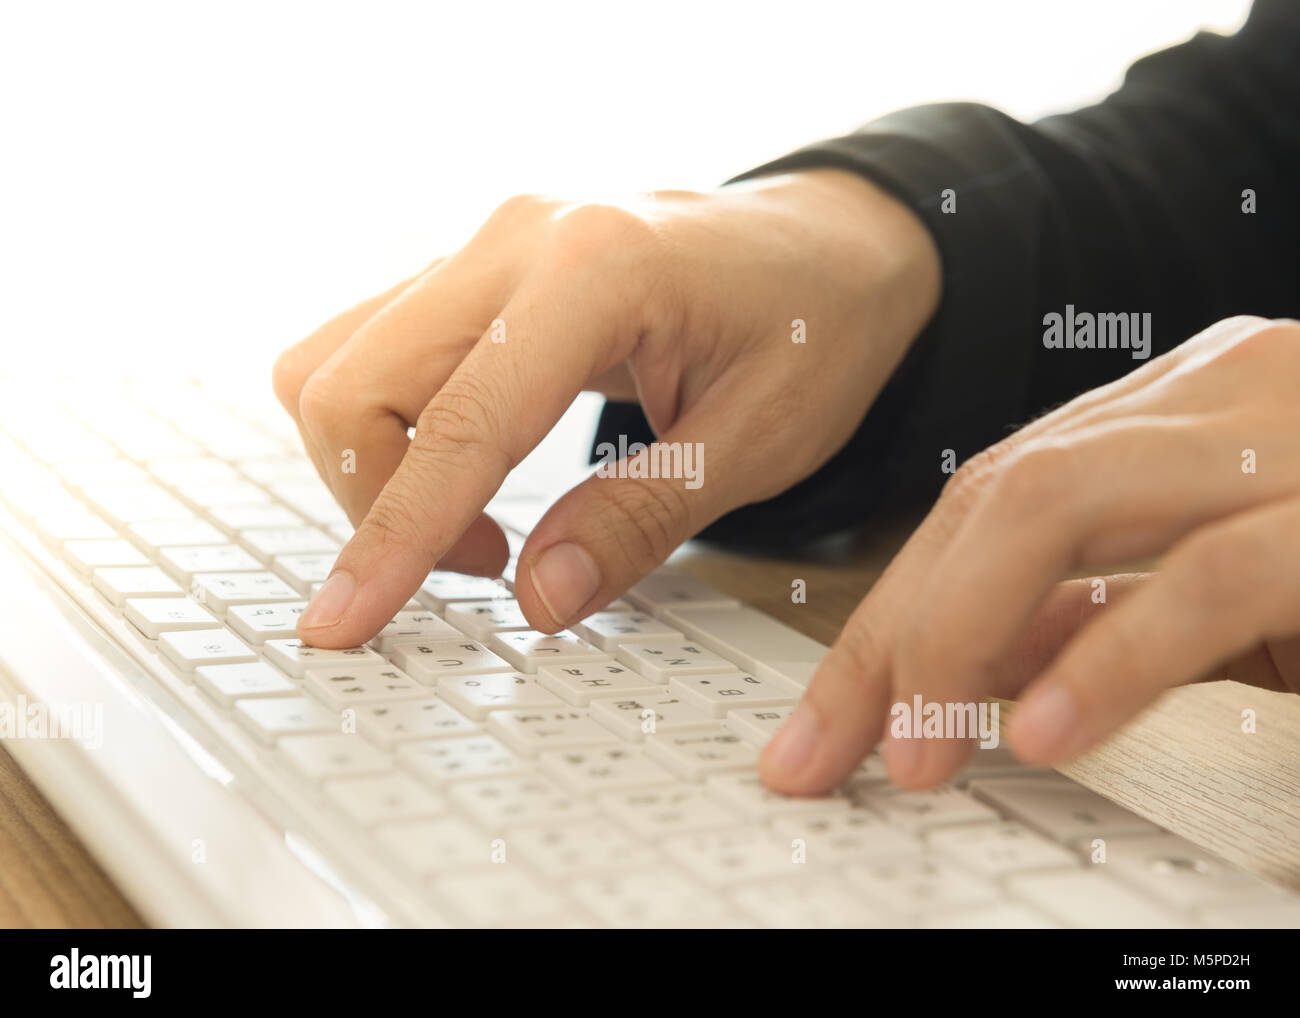 human's hands typing on computer keyboard. selective focus. Stock Photo